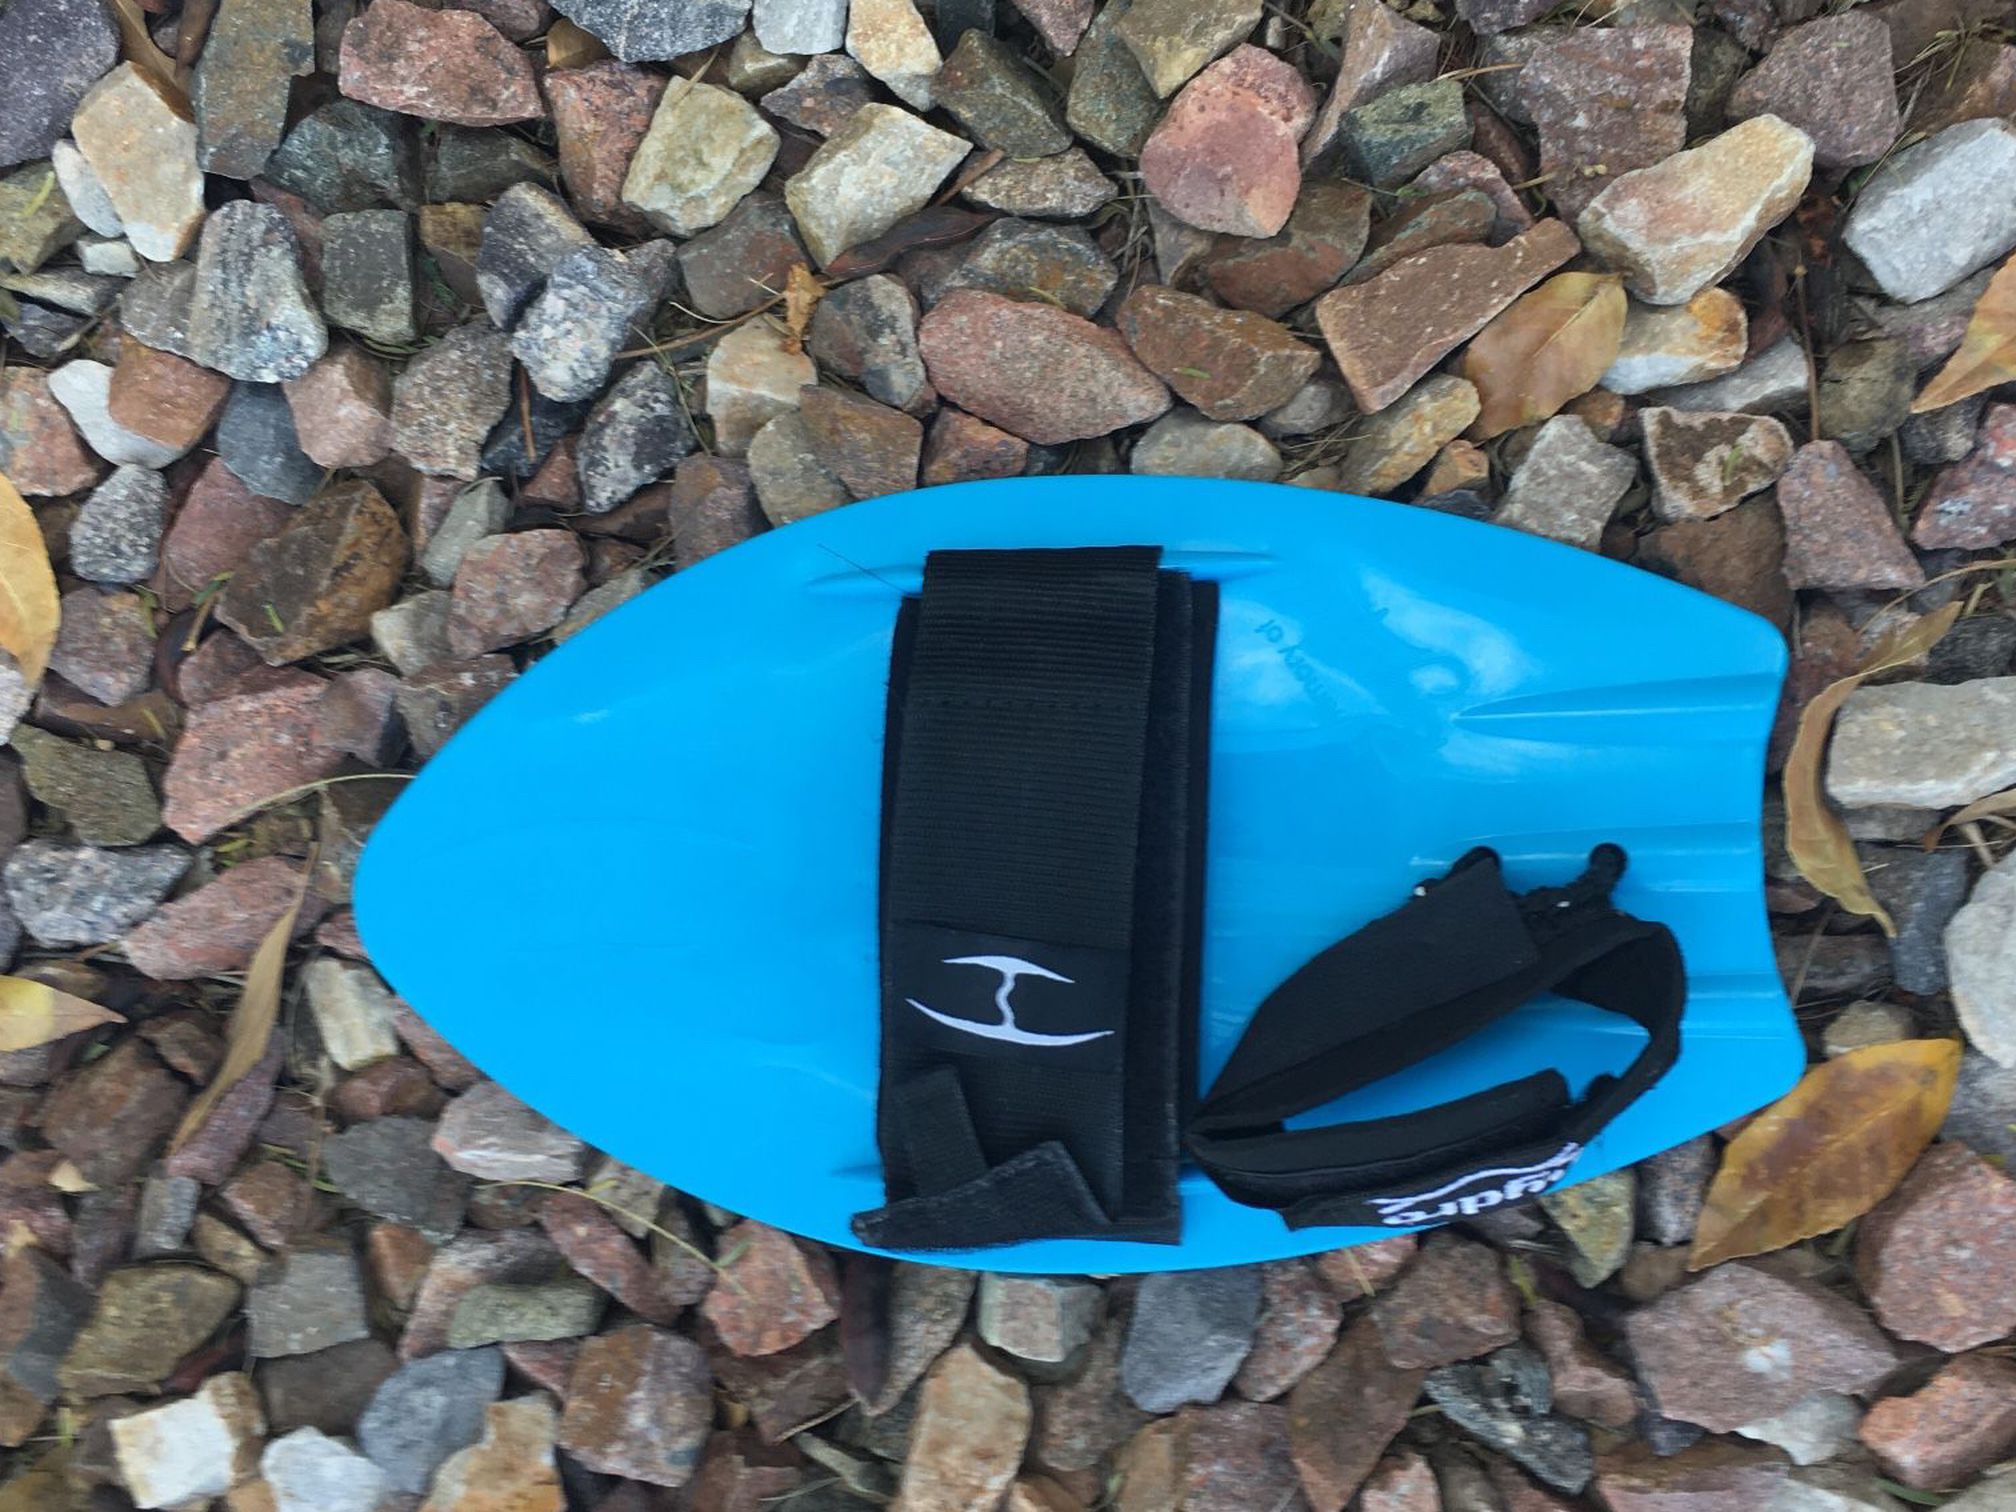 Hydro Body Pro Surfboard By Ray Gill